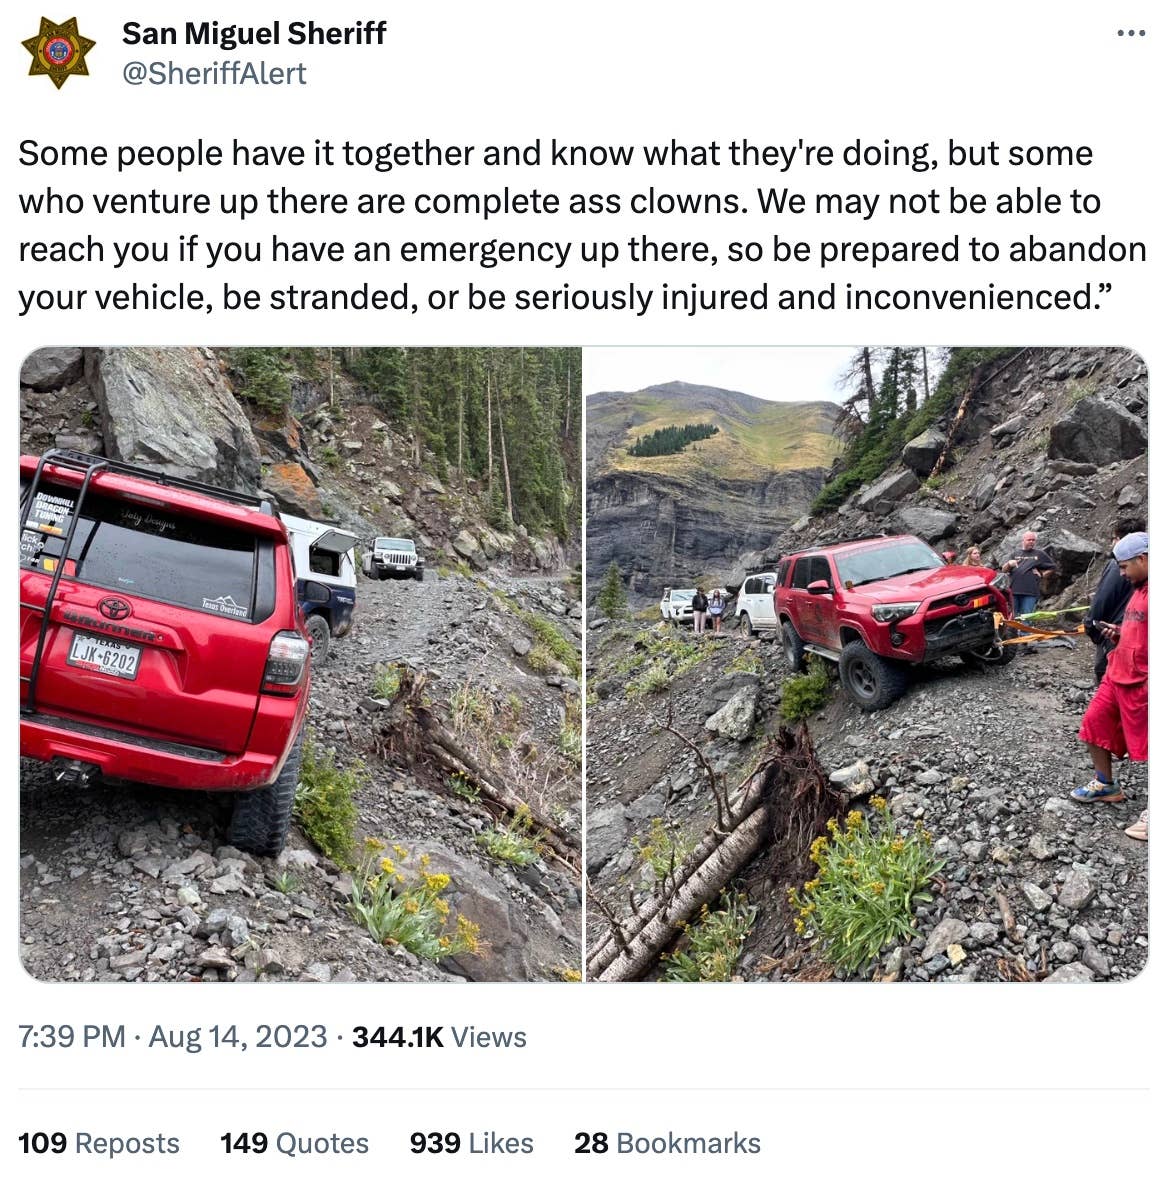 San Miguel Sheriff lambasts an incompetent off-roader on social media, calling them "complete ass clowns"